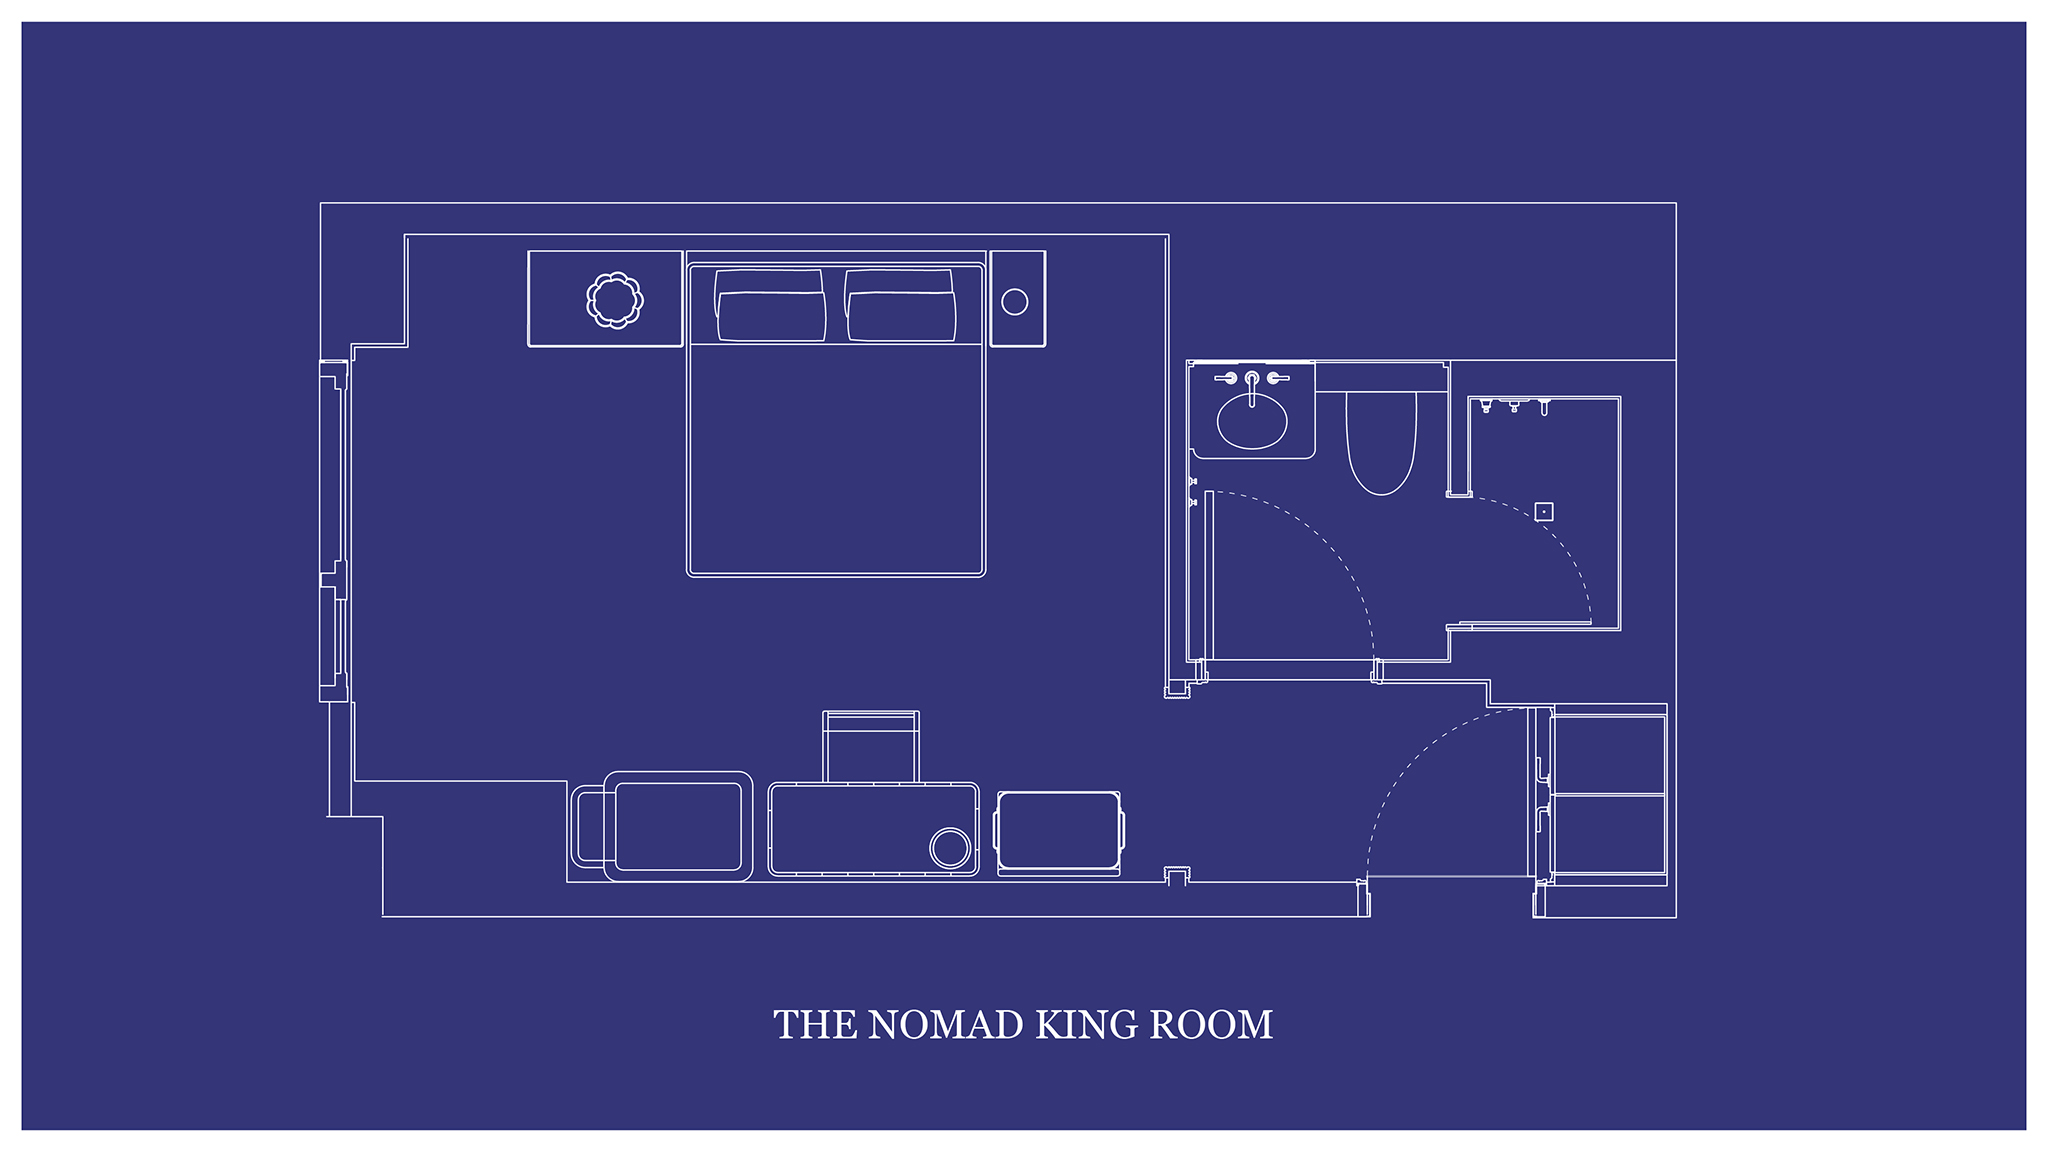 The architectural layout of "THE NOMAD KING ROOM" is depicted on a blueprint map.